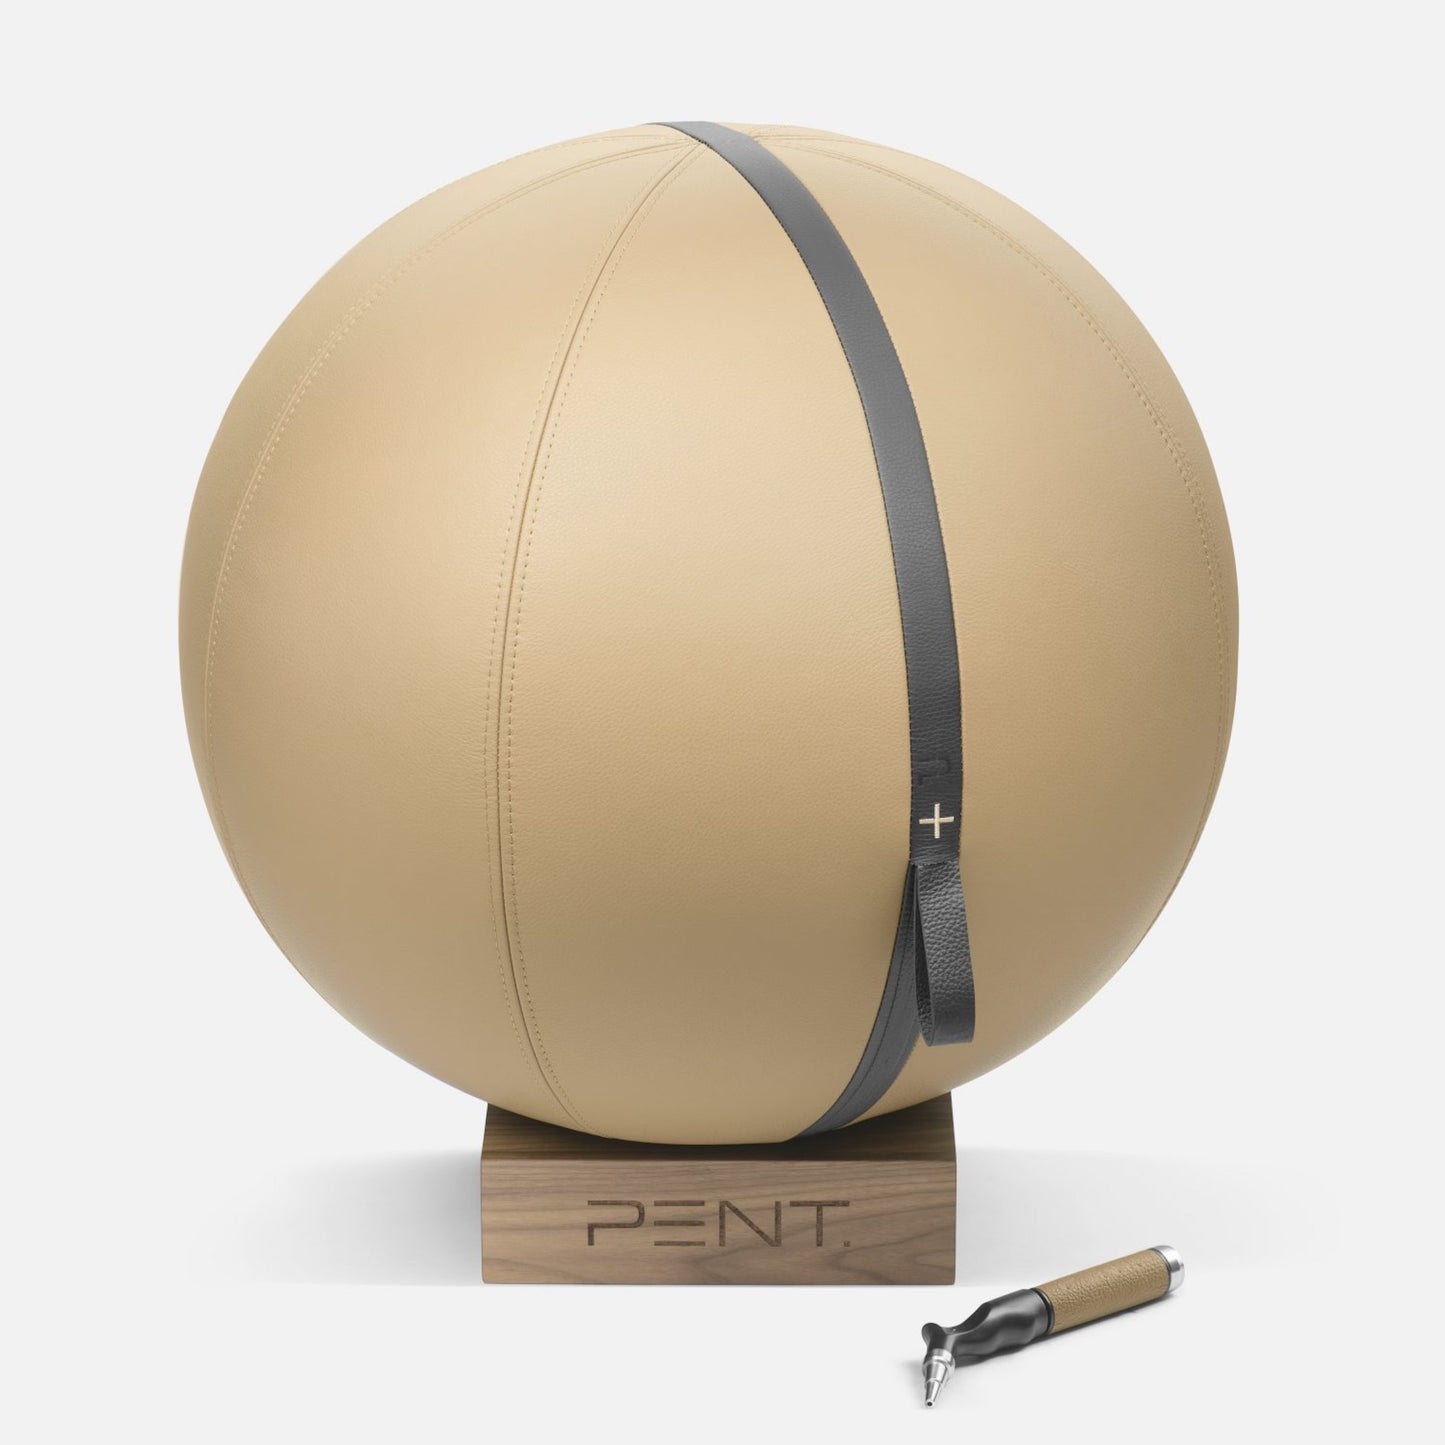 A 65cm Fitness Ball in luxurious leather, displayed on a compact wooden stand, with a handheld pump available in Singapore and Australia.